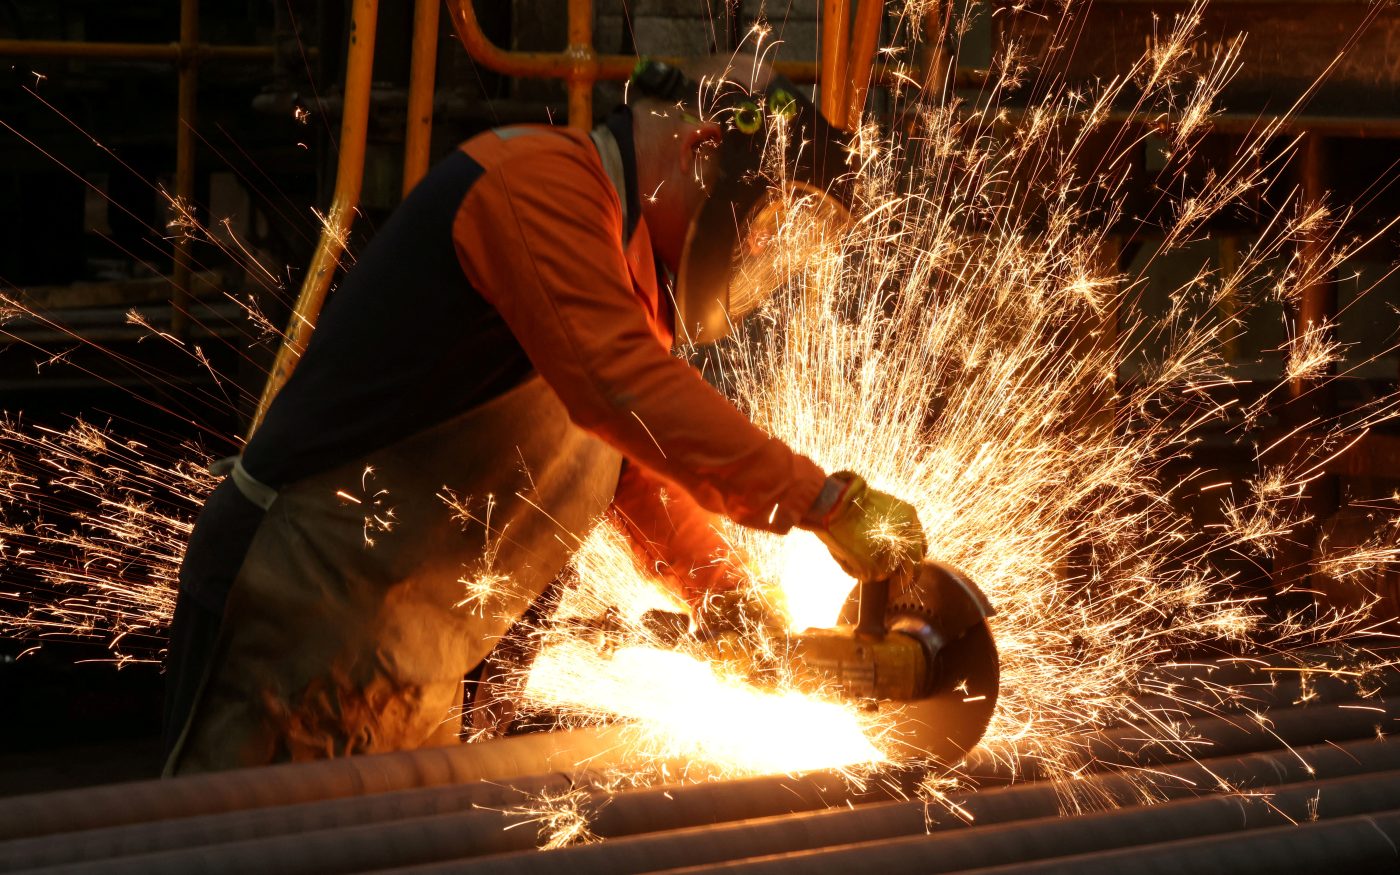 Photo: A worker cuts newly manufactured bars of steel at the United Cast Bar Group's foundry in Chesterfield, Britain, April 12, 2022. Picture taken April 12, 2022. Credit: REUTERS/Phil Noble